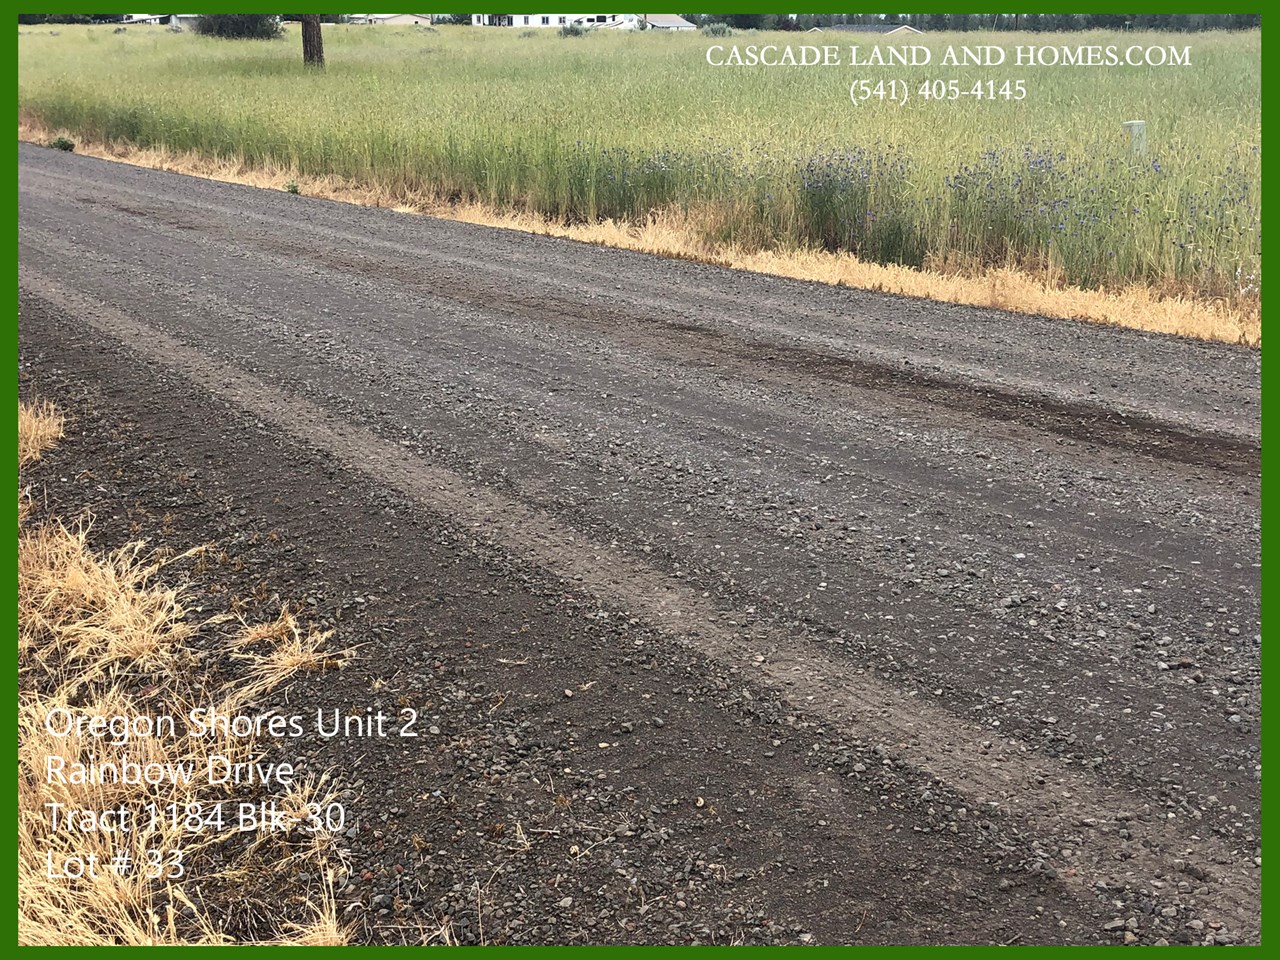 the roads are well maintained compacted gravel, included in your low yearly hoa fees.